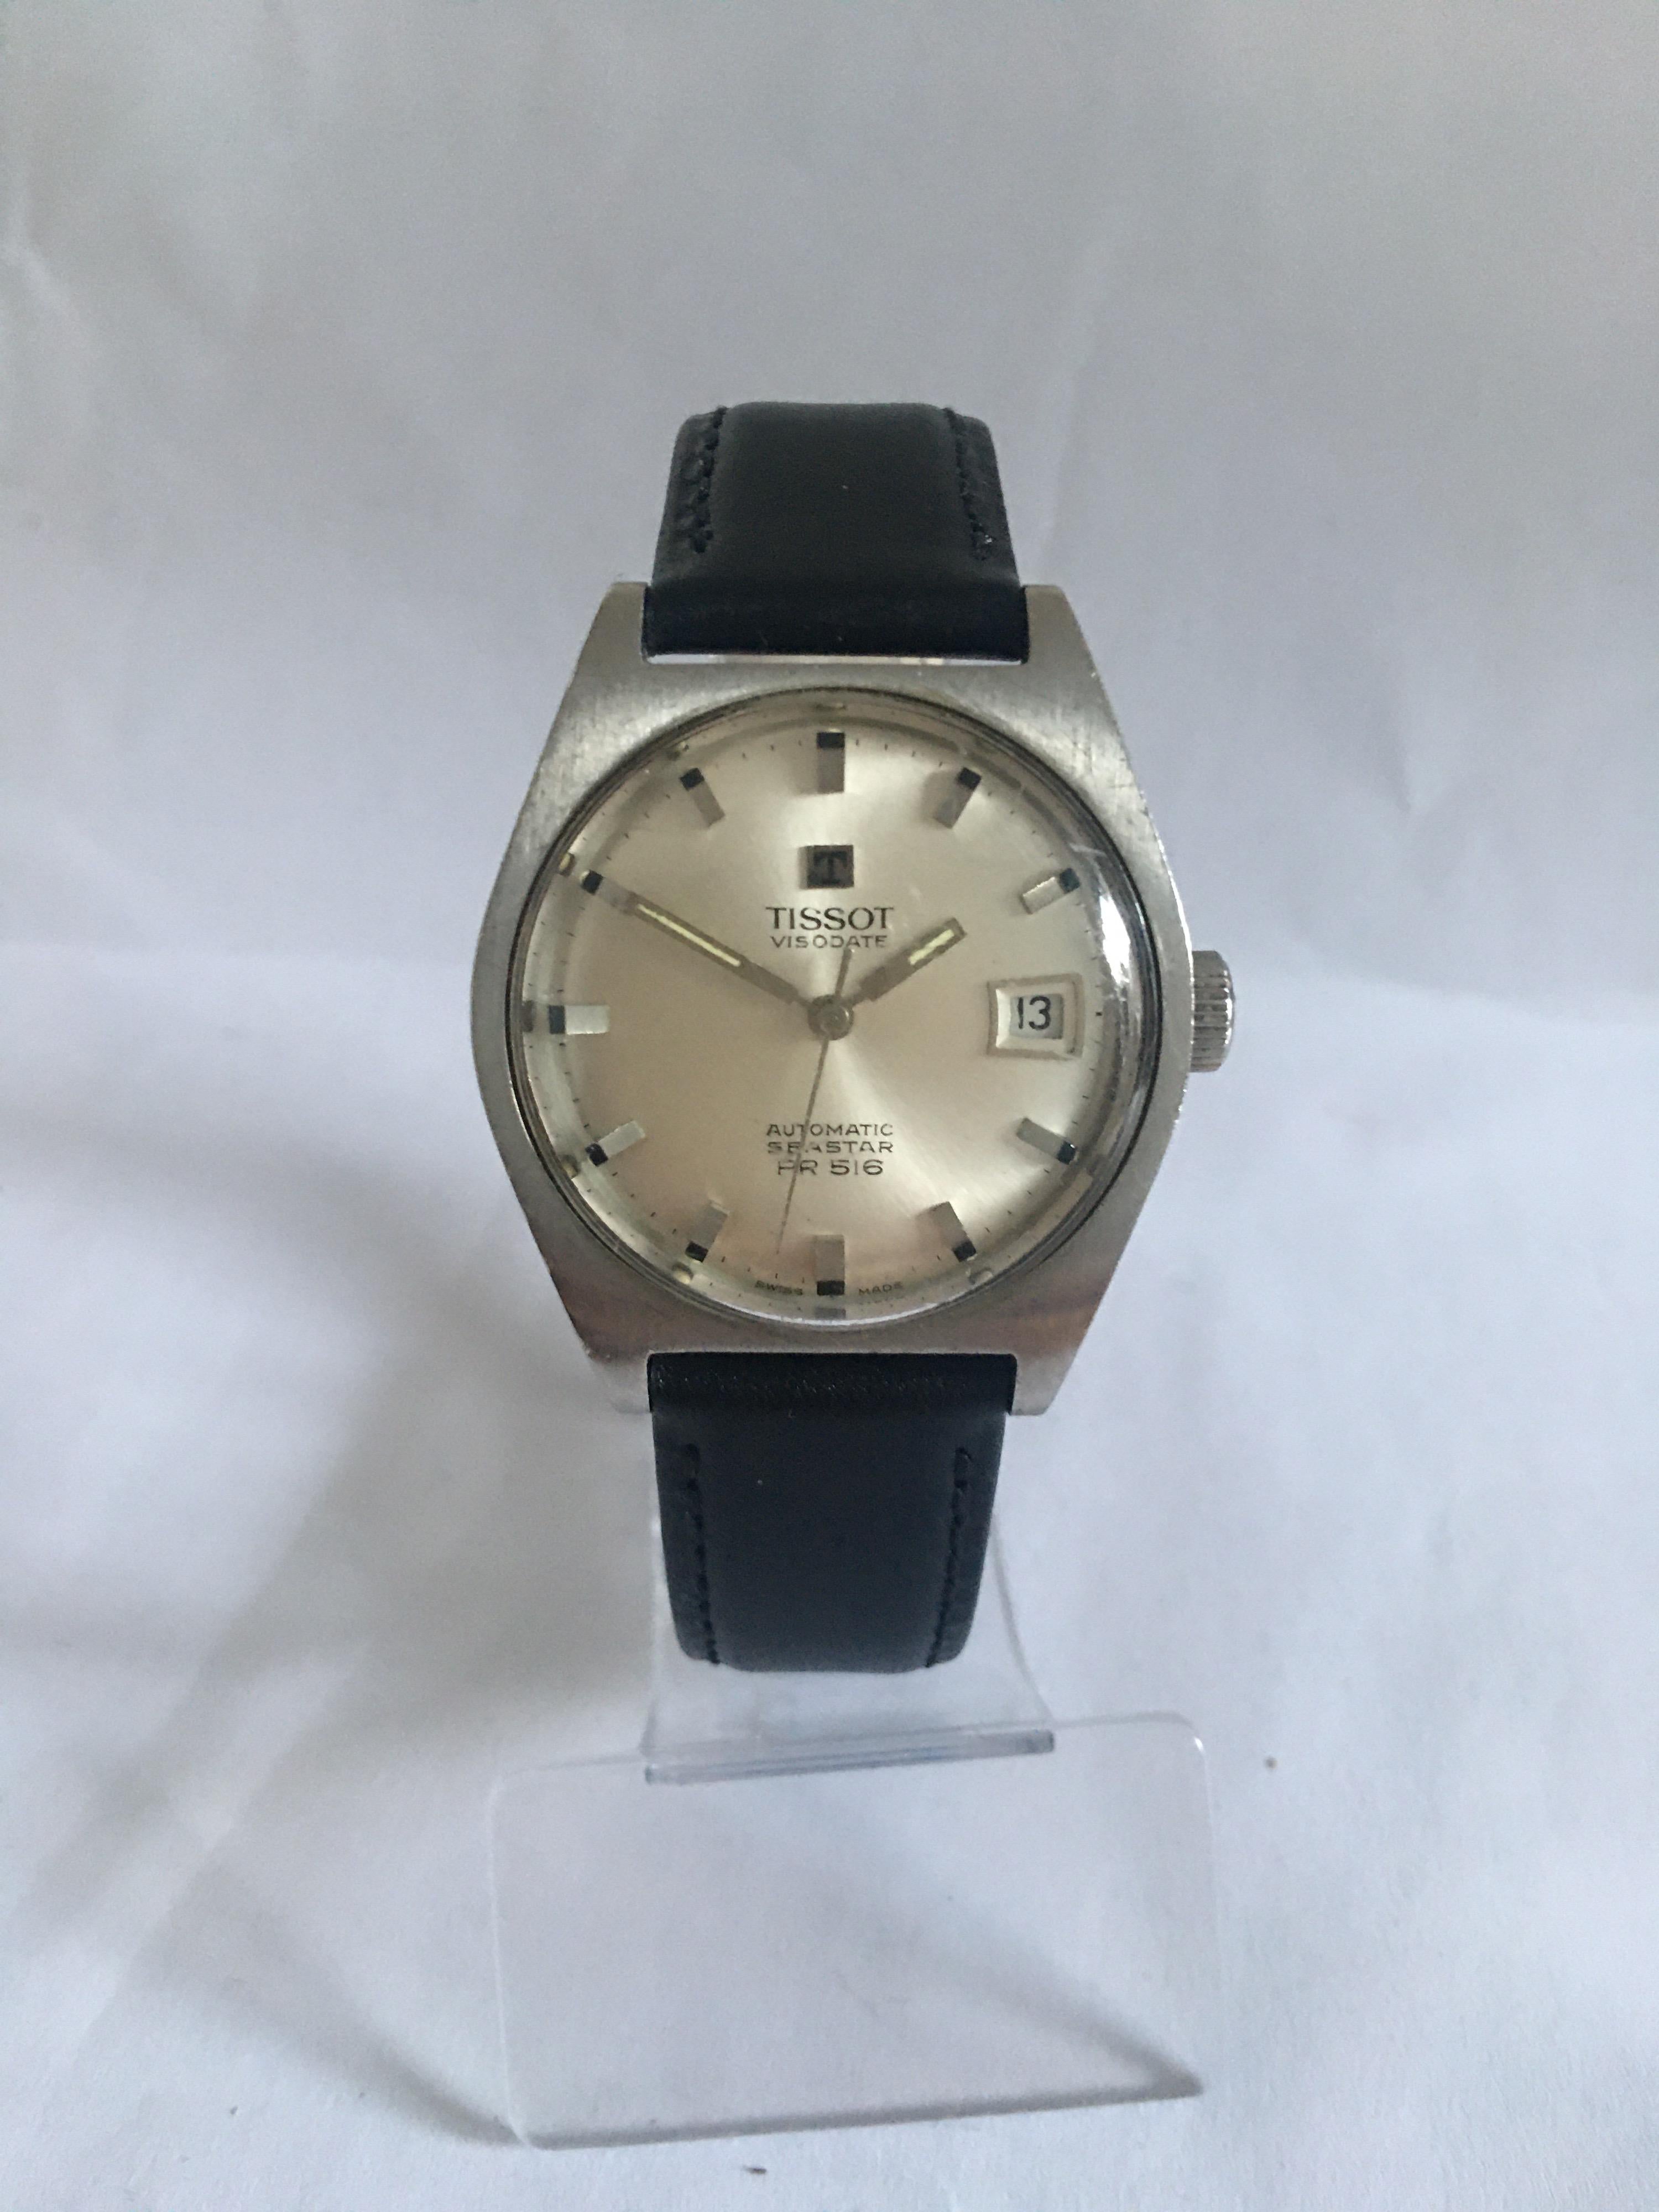 This Pre-own watch is working and running well with its swift seconds, fine scratches on the glass and the bessel. Please study the images carefully as form part of the description.